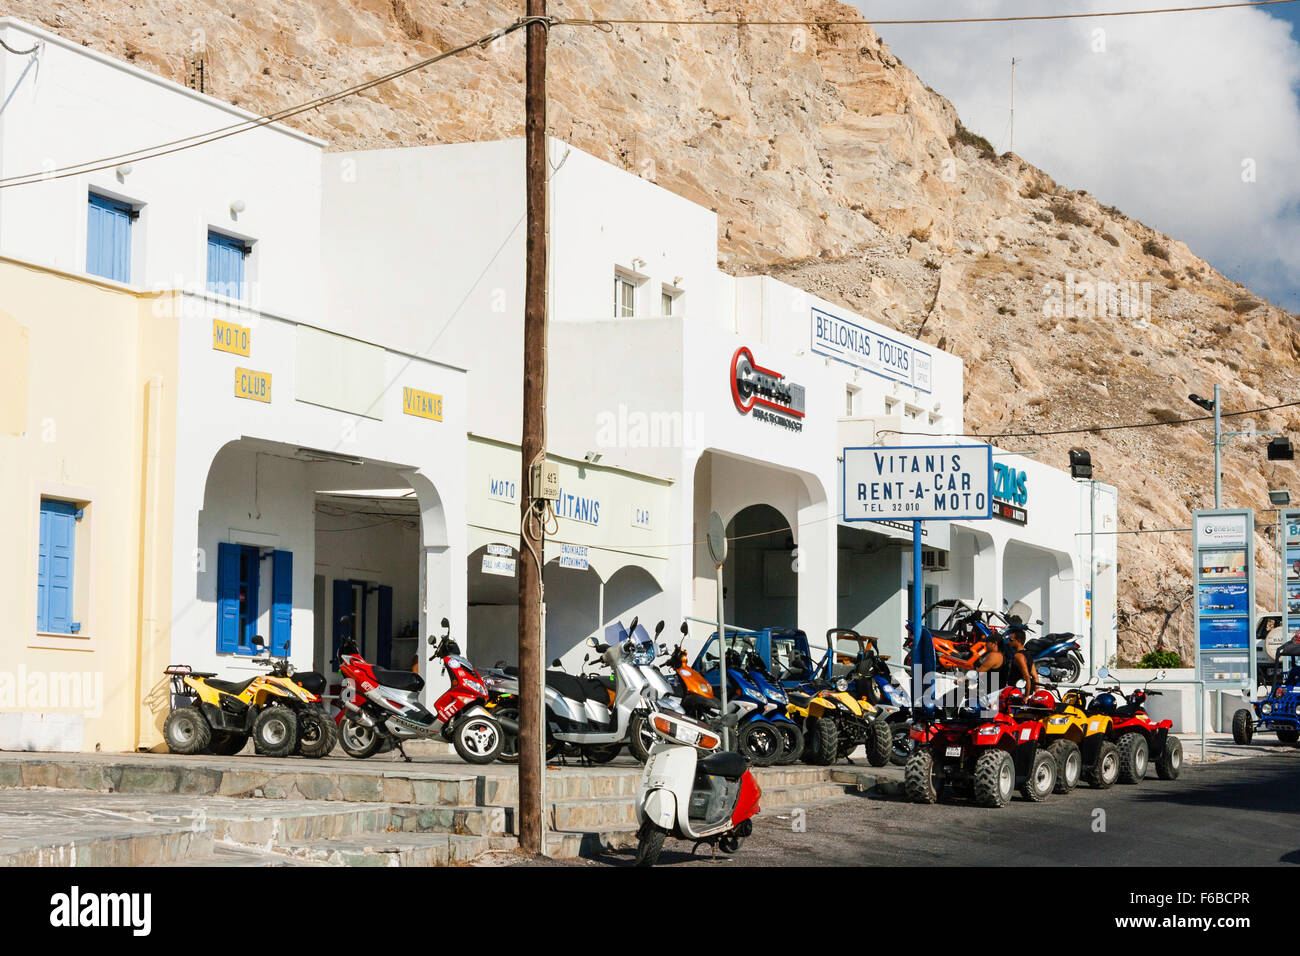 Santorini, Thira. Kamari. Vitanis rent-a-car and motorbike hire building.  Whitewashed with quad bikes in rows outside. Mountain backdrop Stock Photo  - Alamy